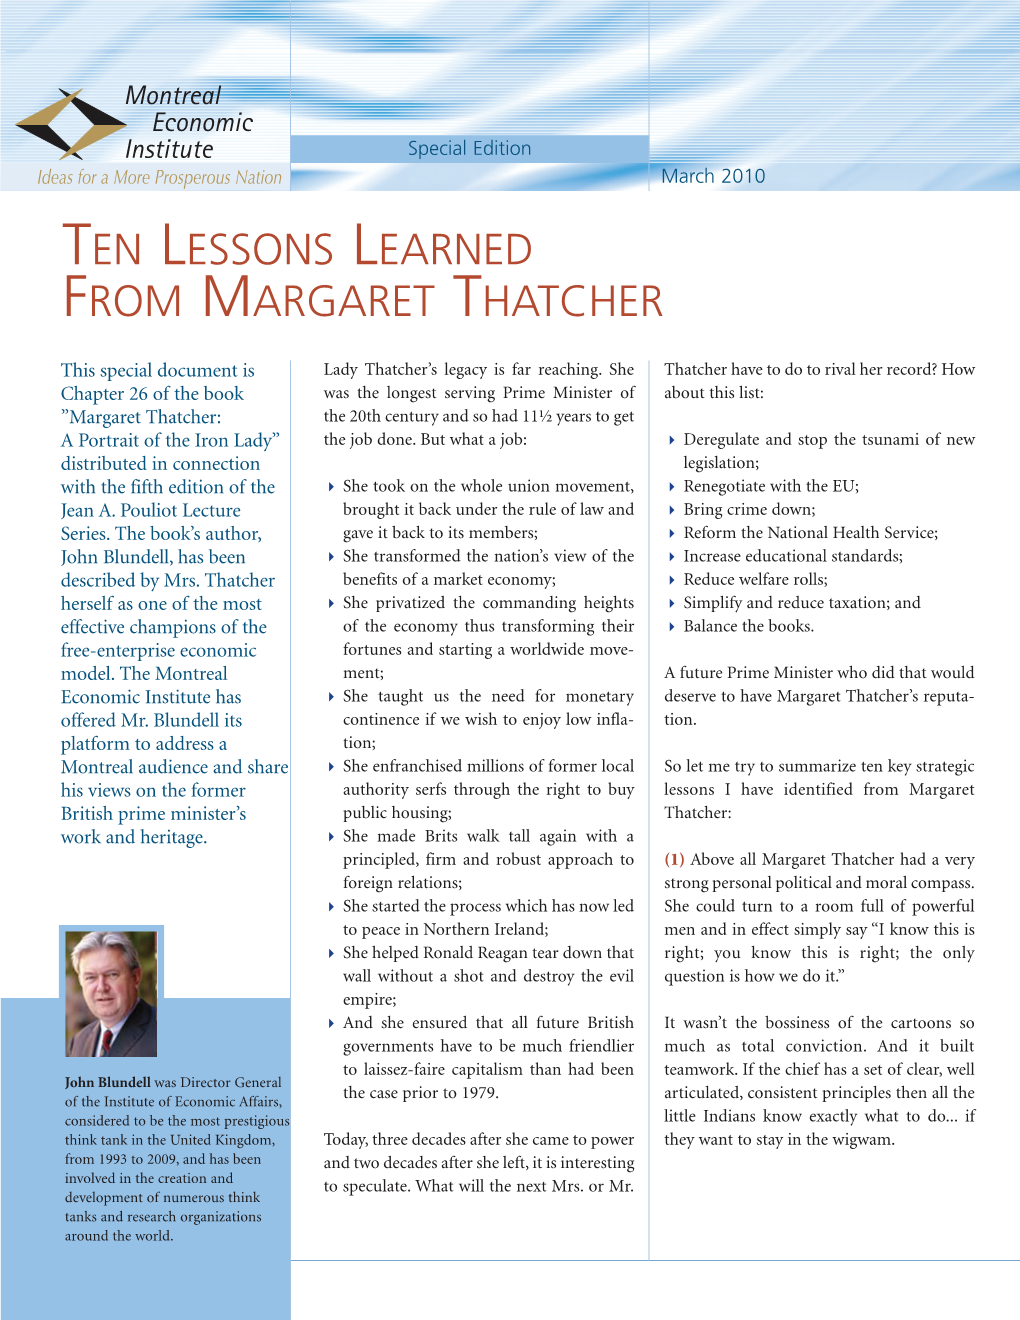 Ten Lessons Learned from Margaret Thatcher